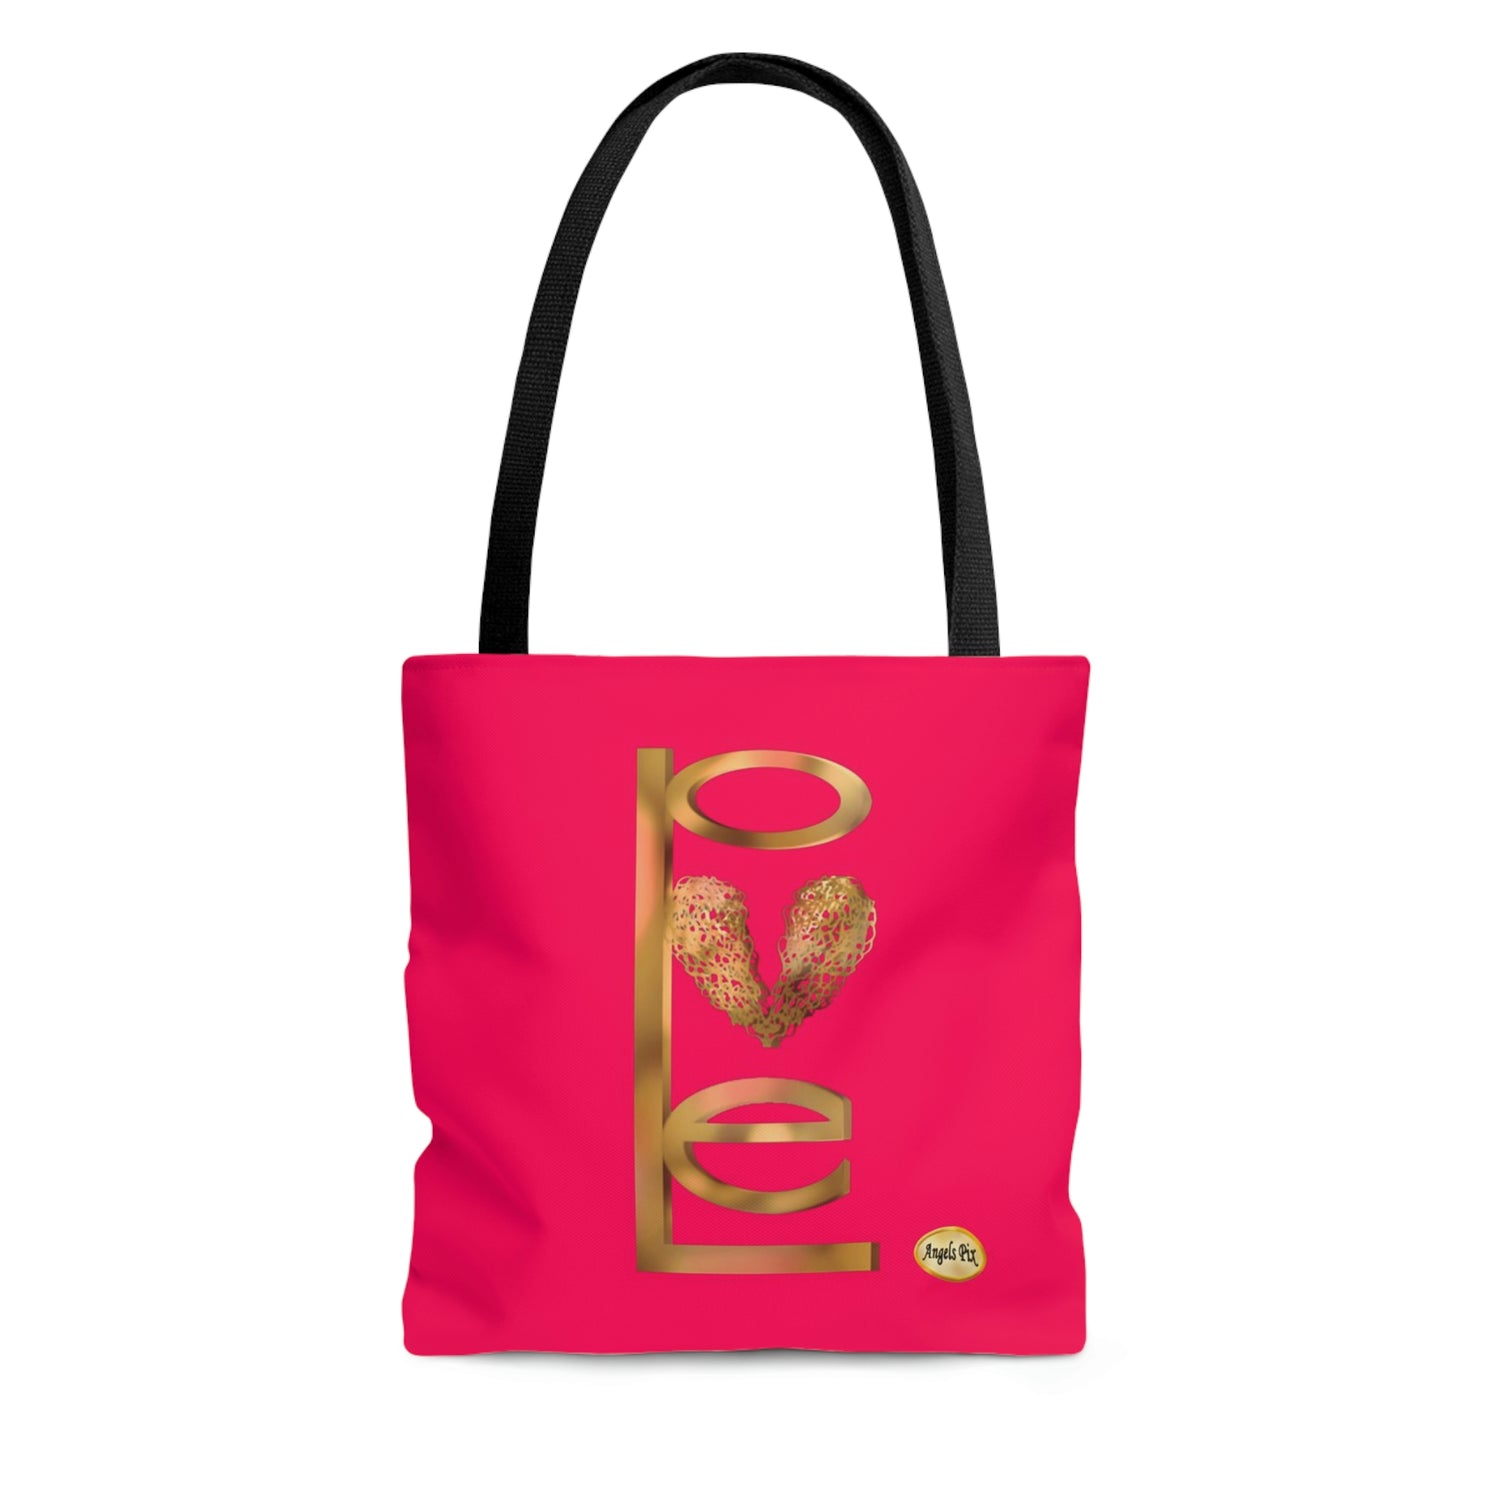 When you want the perfect birthday present or Valentines Day gift for that special someone.  Show her how much you love her with the beautiful tote bag that she'll use every day.